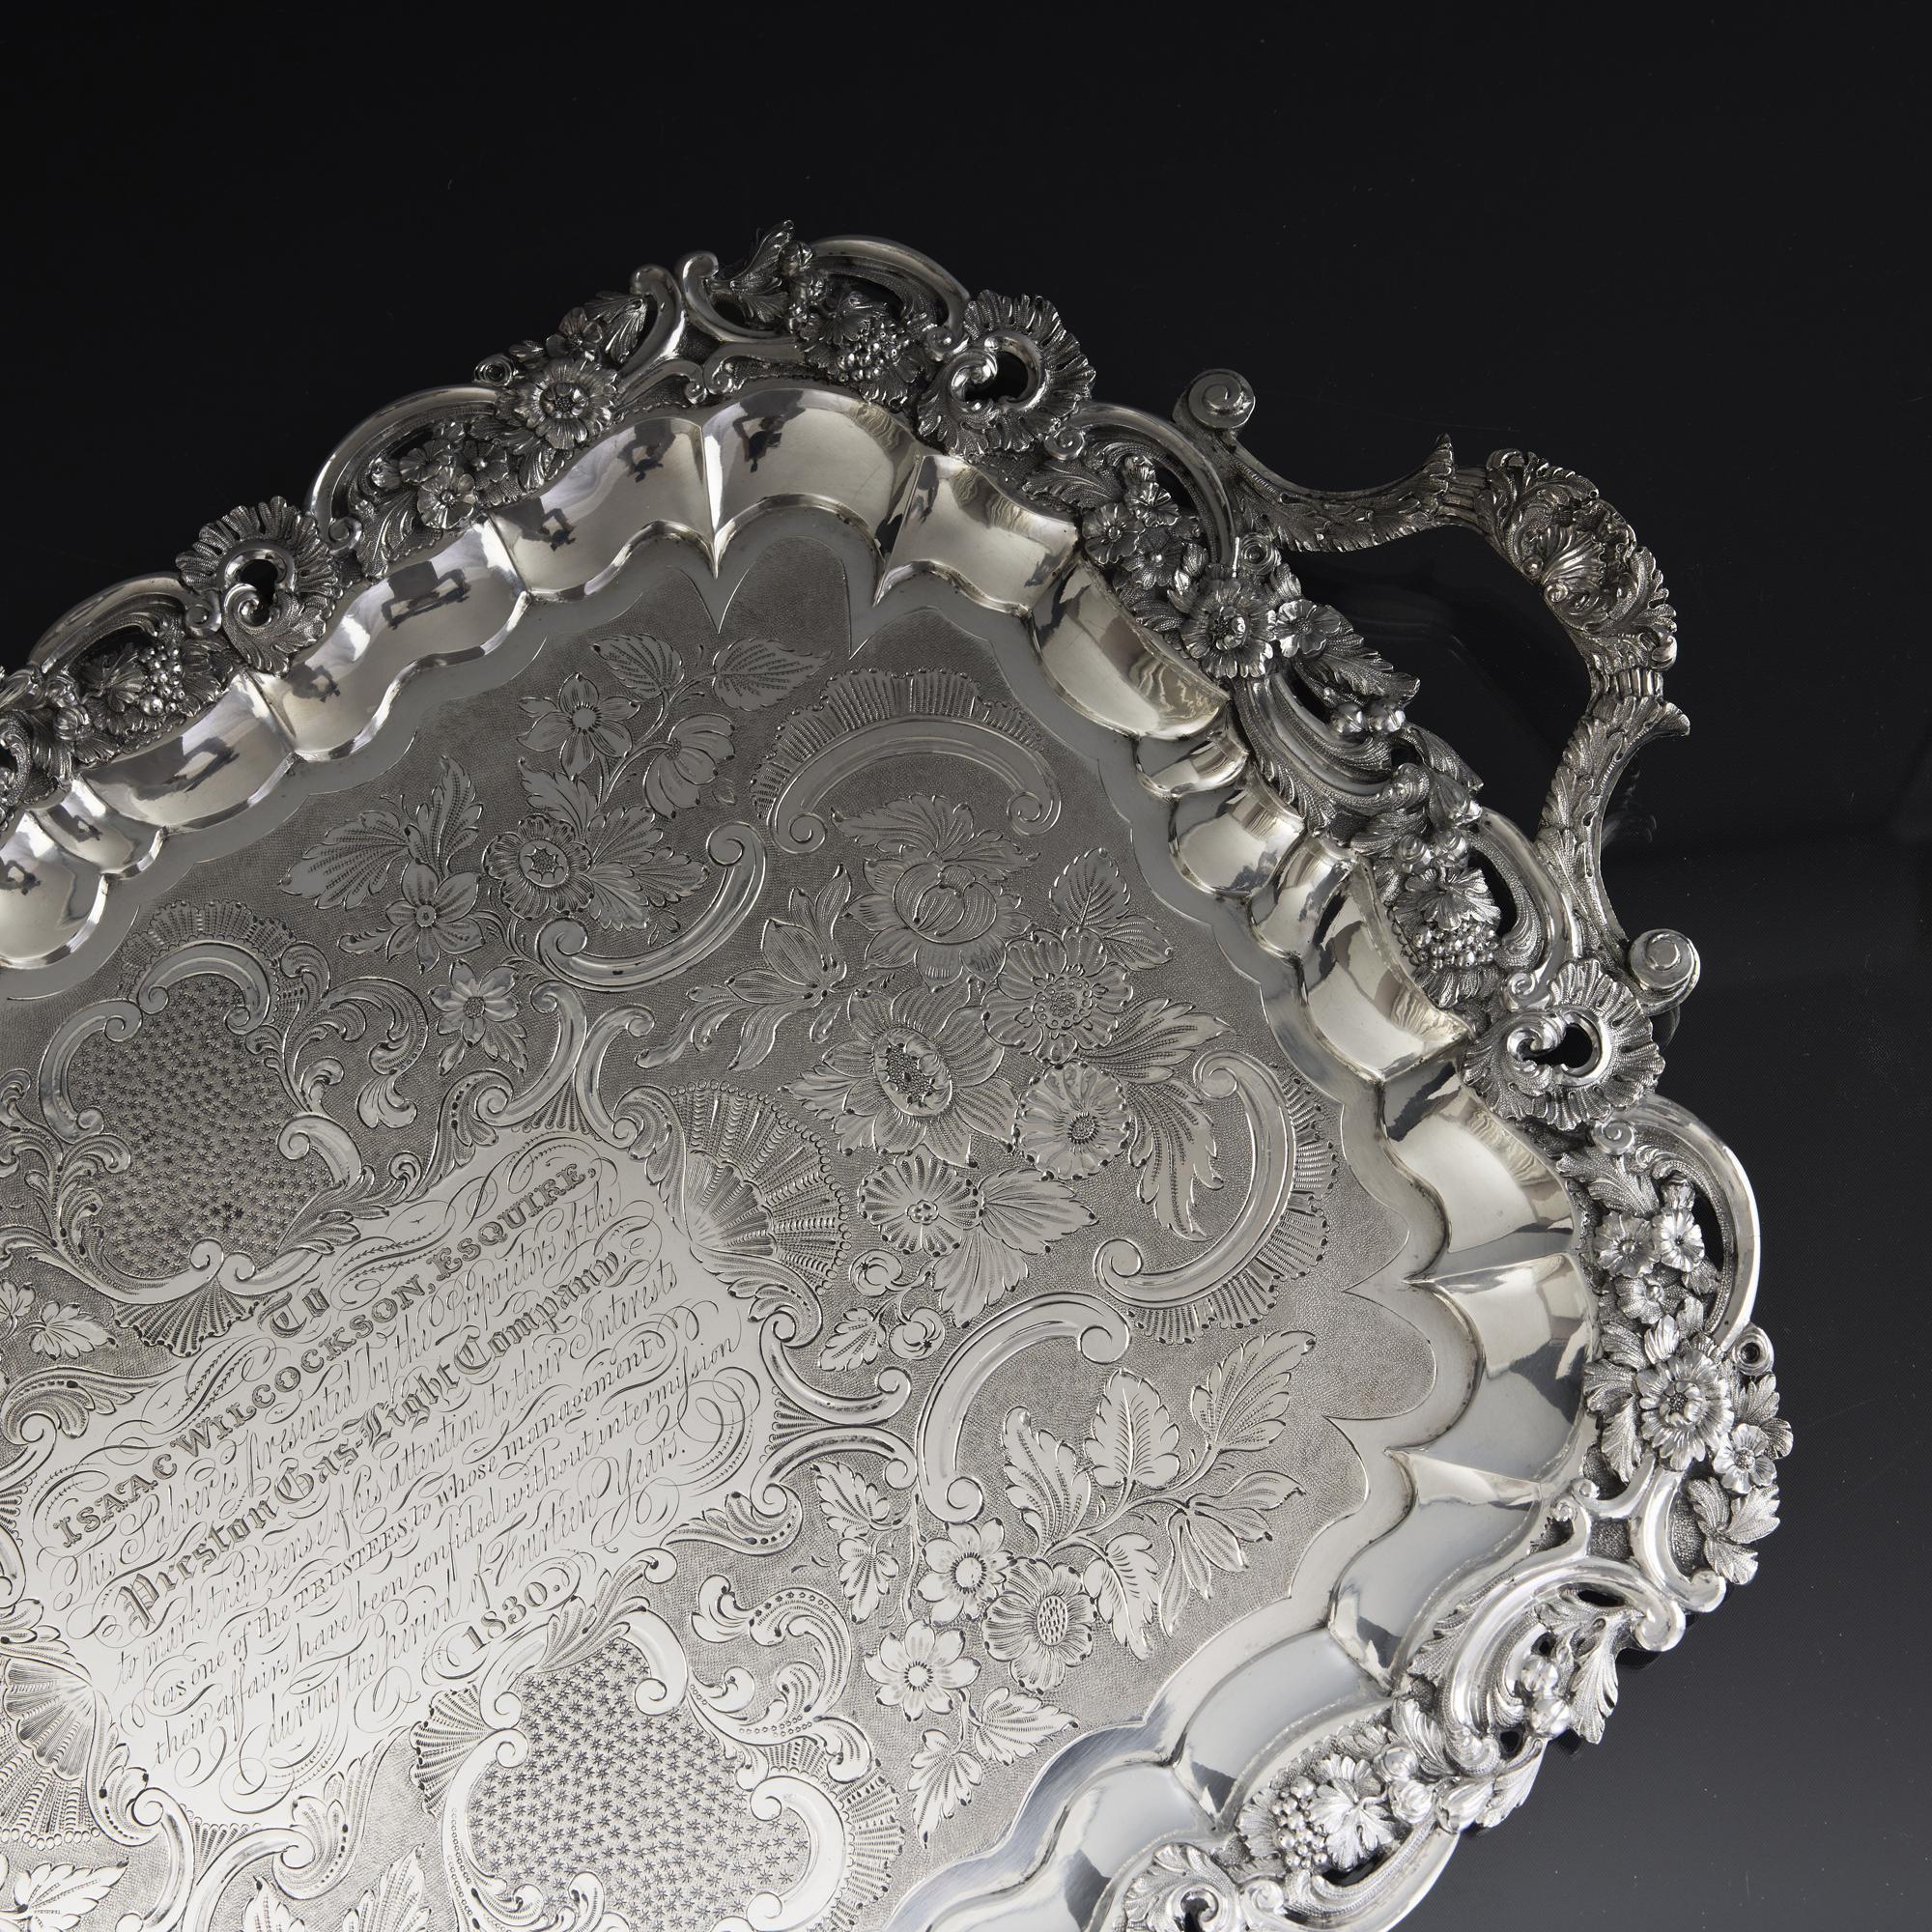 Superb quality and highly decorative two-handled antique silver tray. Fitted with two cast scroll, leaf and scallop shell pattern handles, an applied cast border decorated with intricate openwork patterns runs around the tray, and incorporates